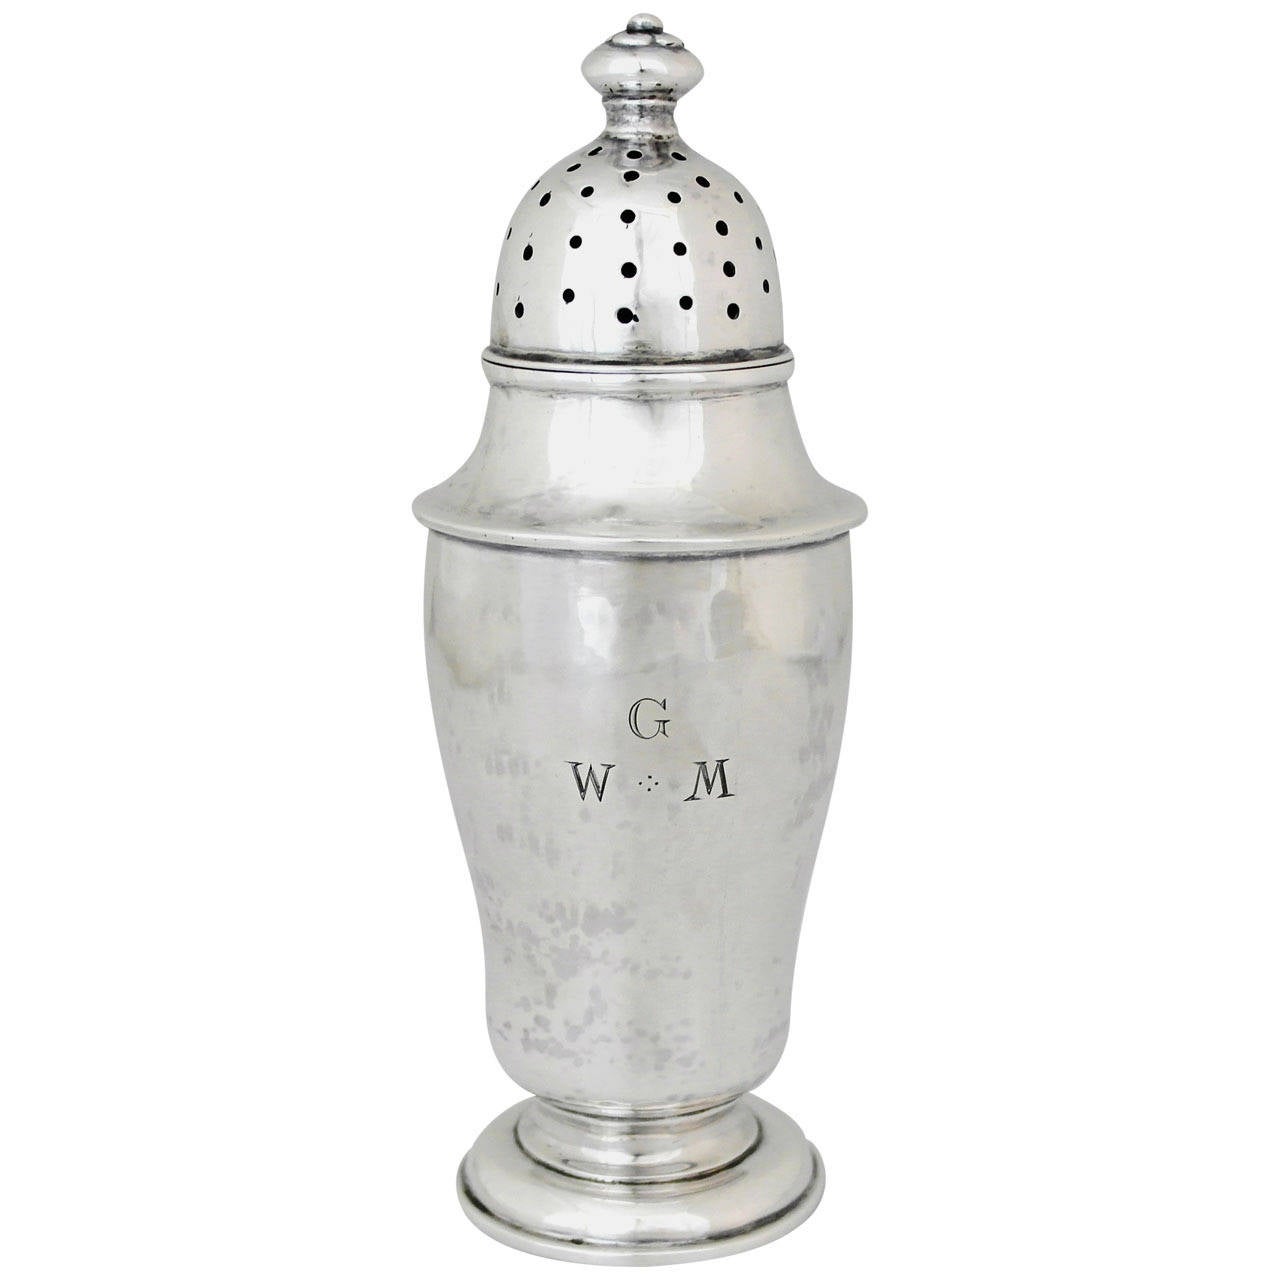 Being offered is a scarce sugar caster by James T. Woolley of Boston, Massachusetts. Incredible handmade caster, an adaptation of an early colonial design, made of heavy gauge silver. Woolley a distinguished member of the Boston Society of Arts